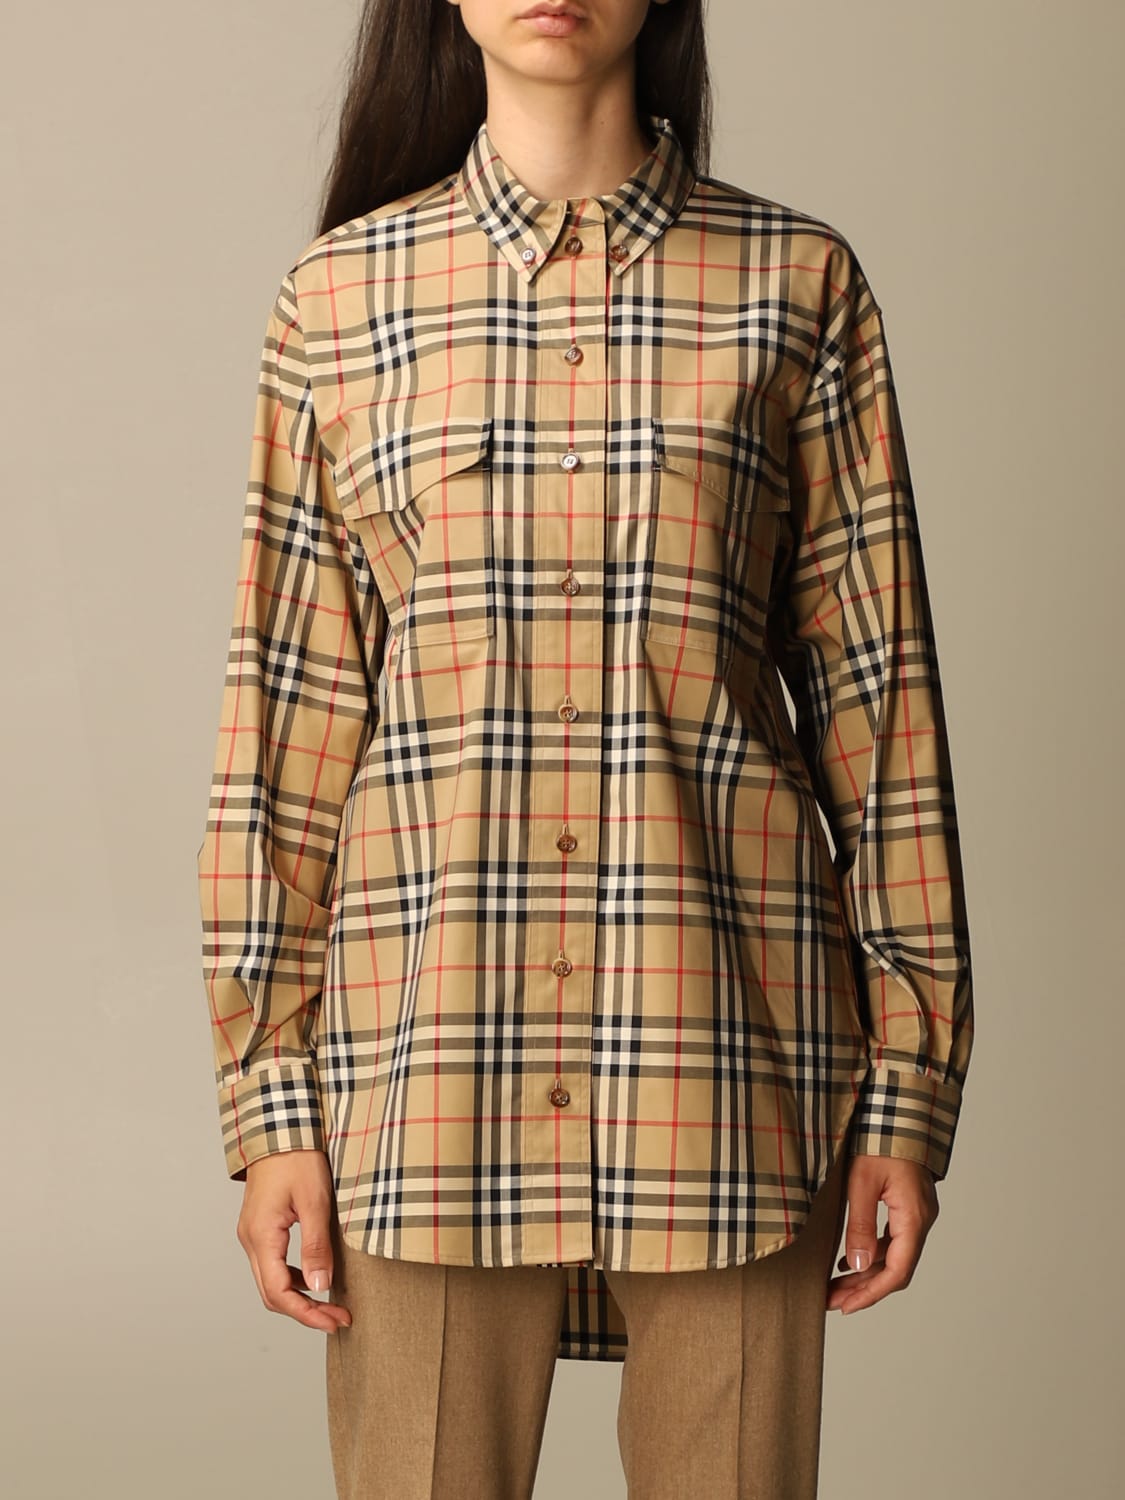 Turnstone Burberry shirt in cotton with vintage check pattern